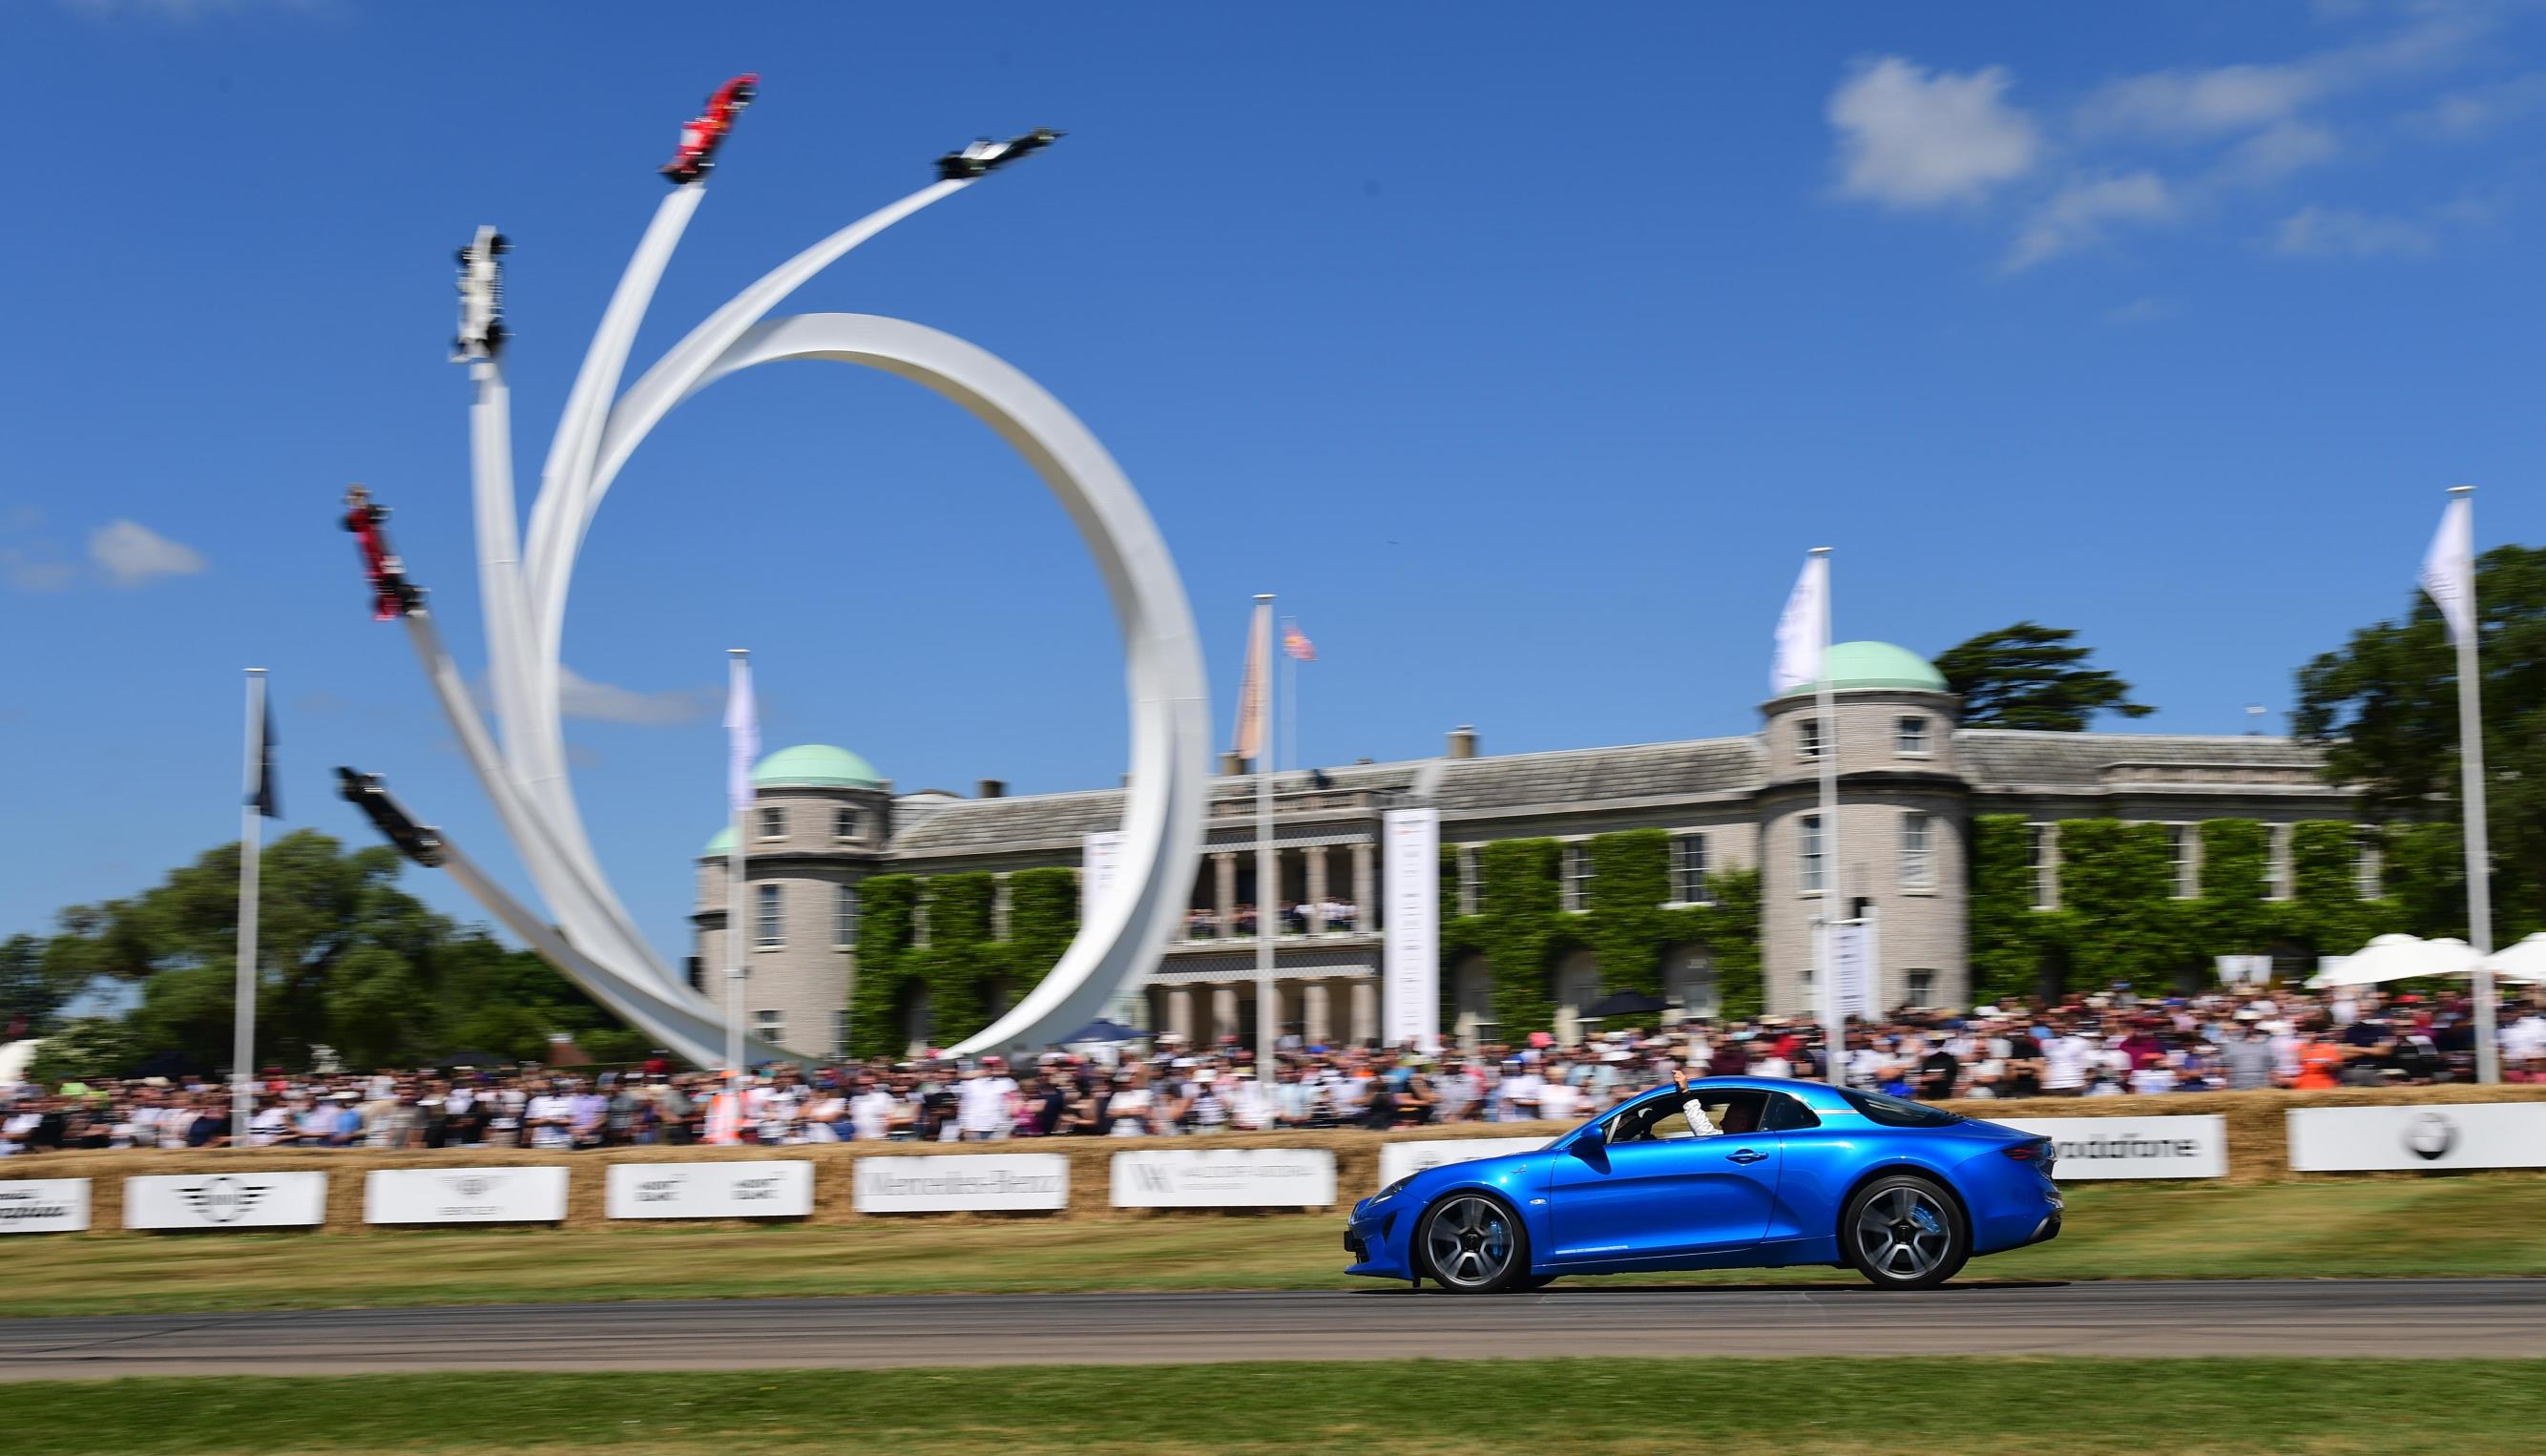 The Festival of Speed is one of the key events of the year